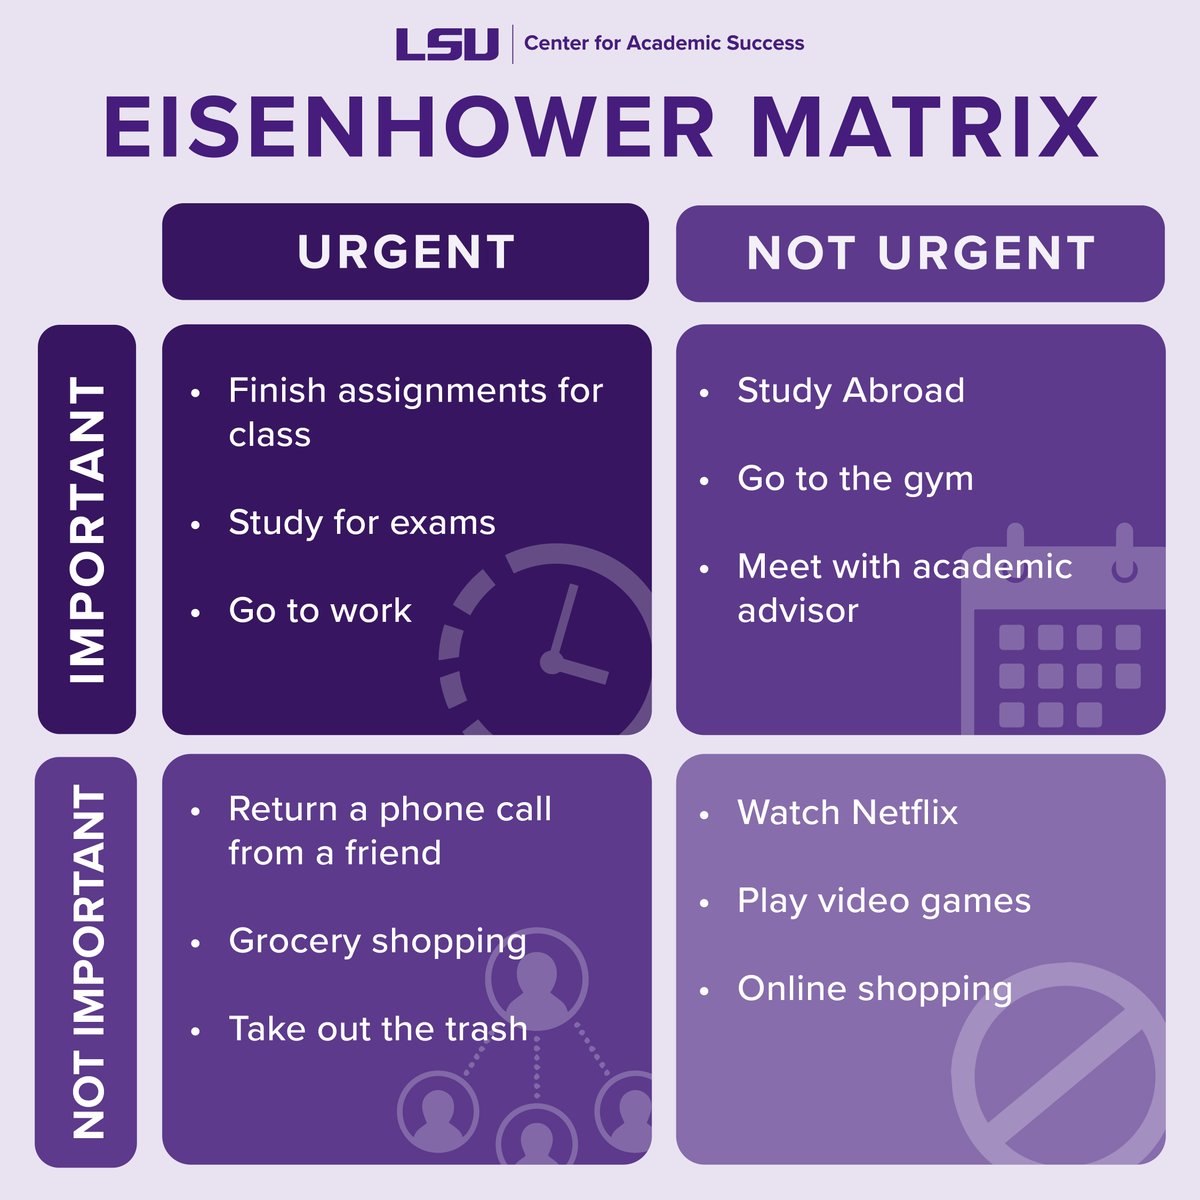 Reclaim your time with the Eisenhower Matrix! This tool helps you prioritize important tasks and establish a well-balanced approach to managing time. Find more time management tips on our website.